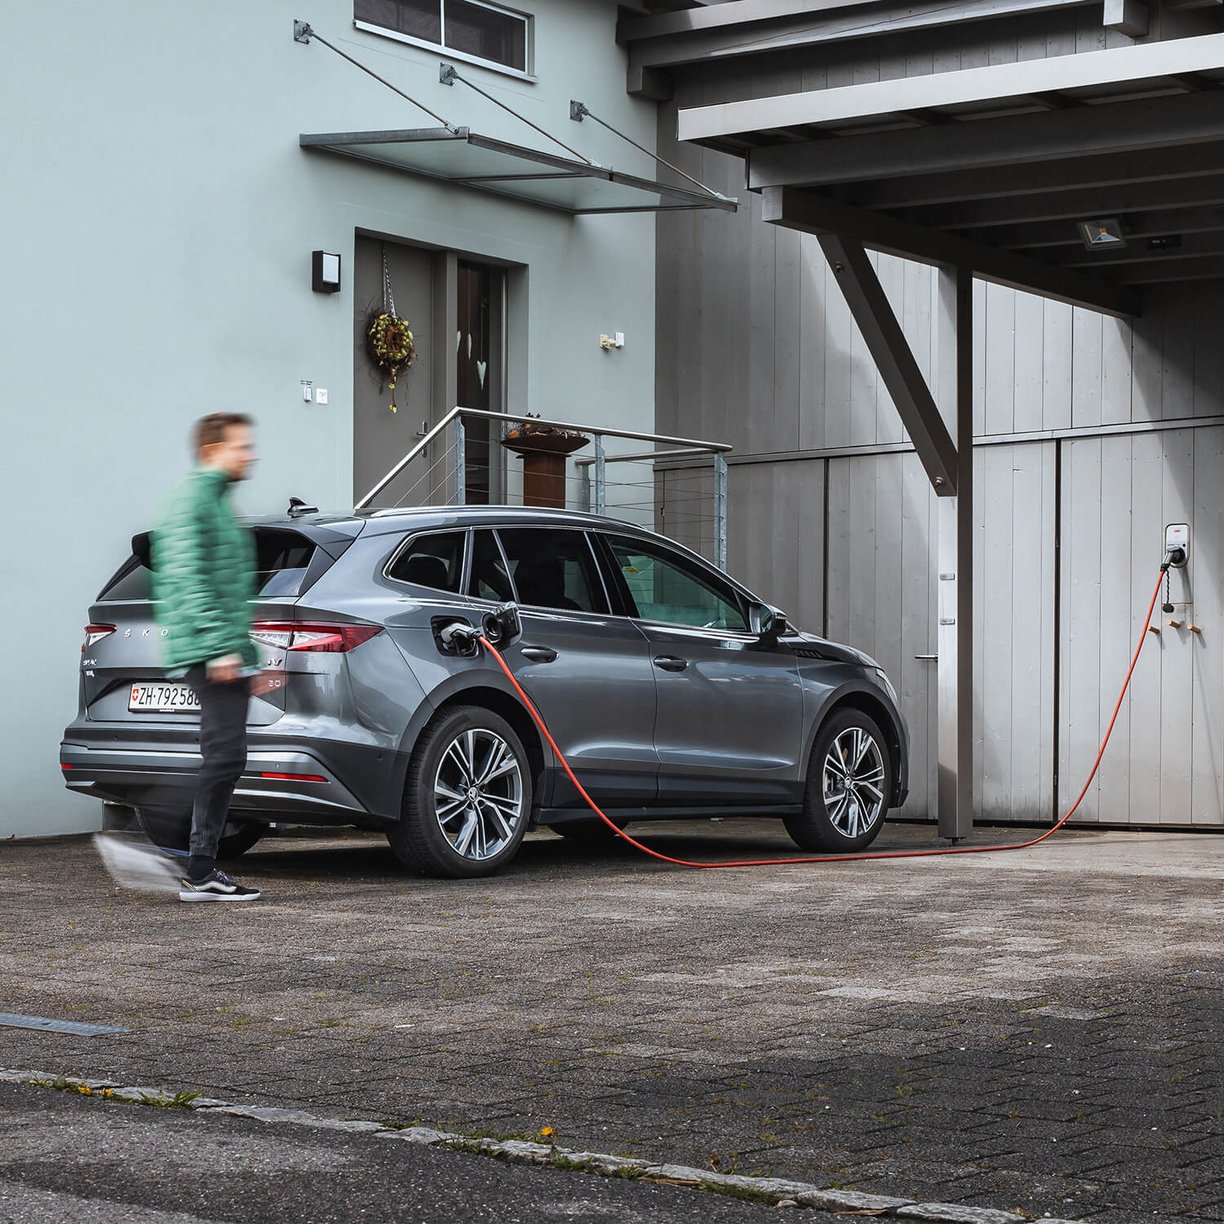 Electric car charging is included with Clyde.